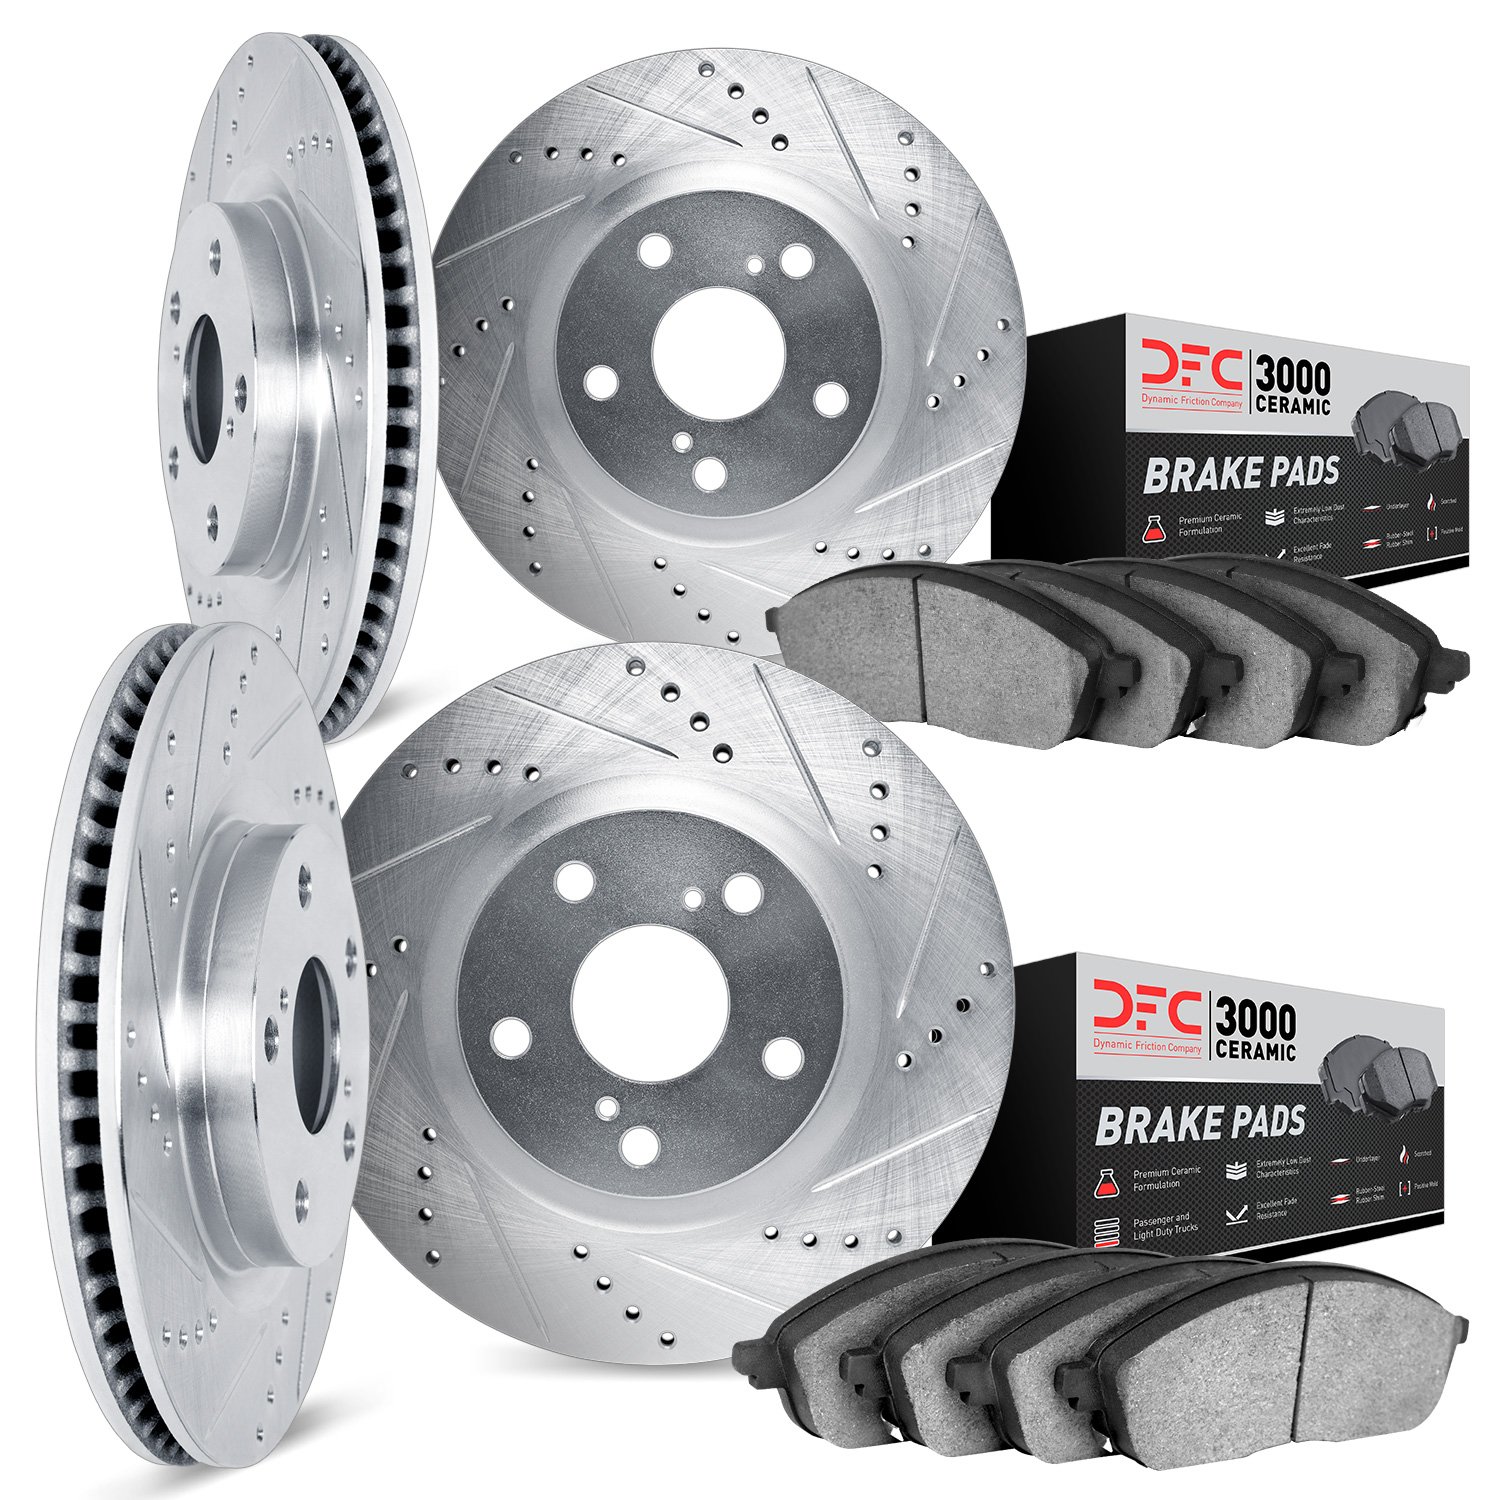 7304-54012 Drilled/Slotted Brake Rotor with 3000-Series Ceramic Brake Pads Kit [Silver], 1991-1992 Ford/Lincoln/Mercury/Mazda, P